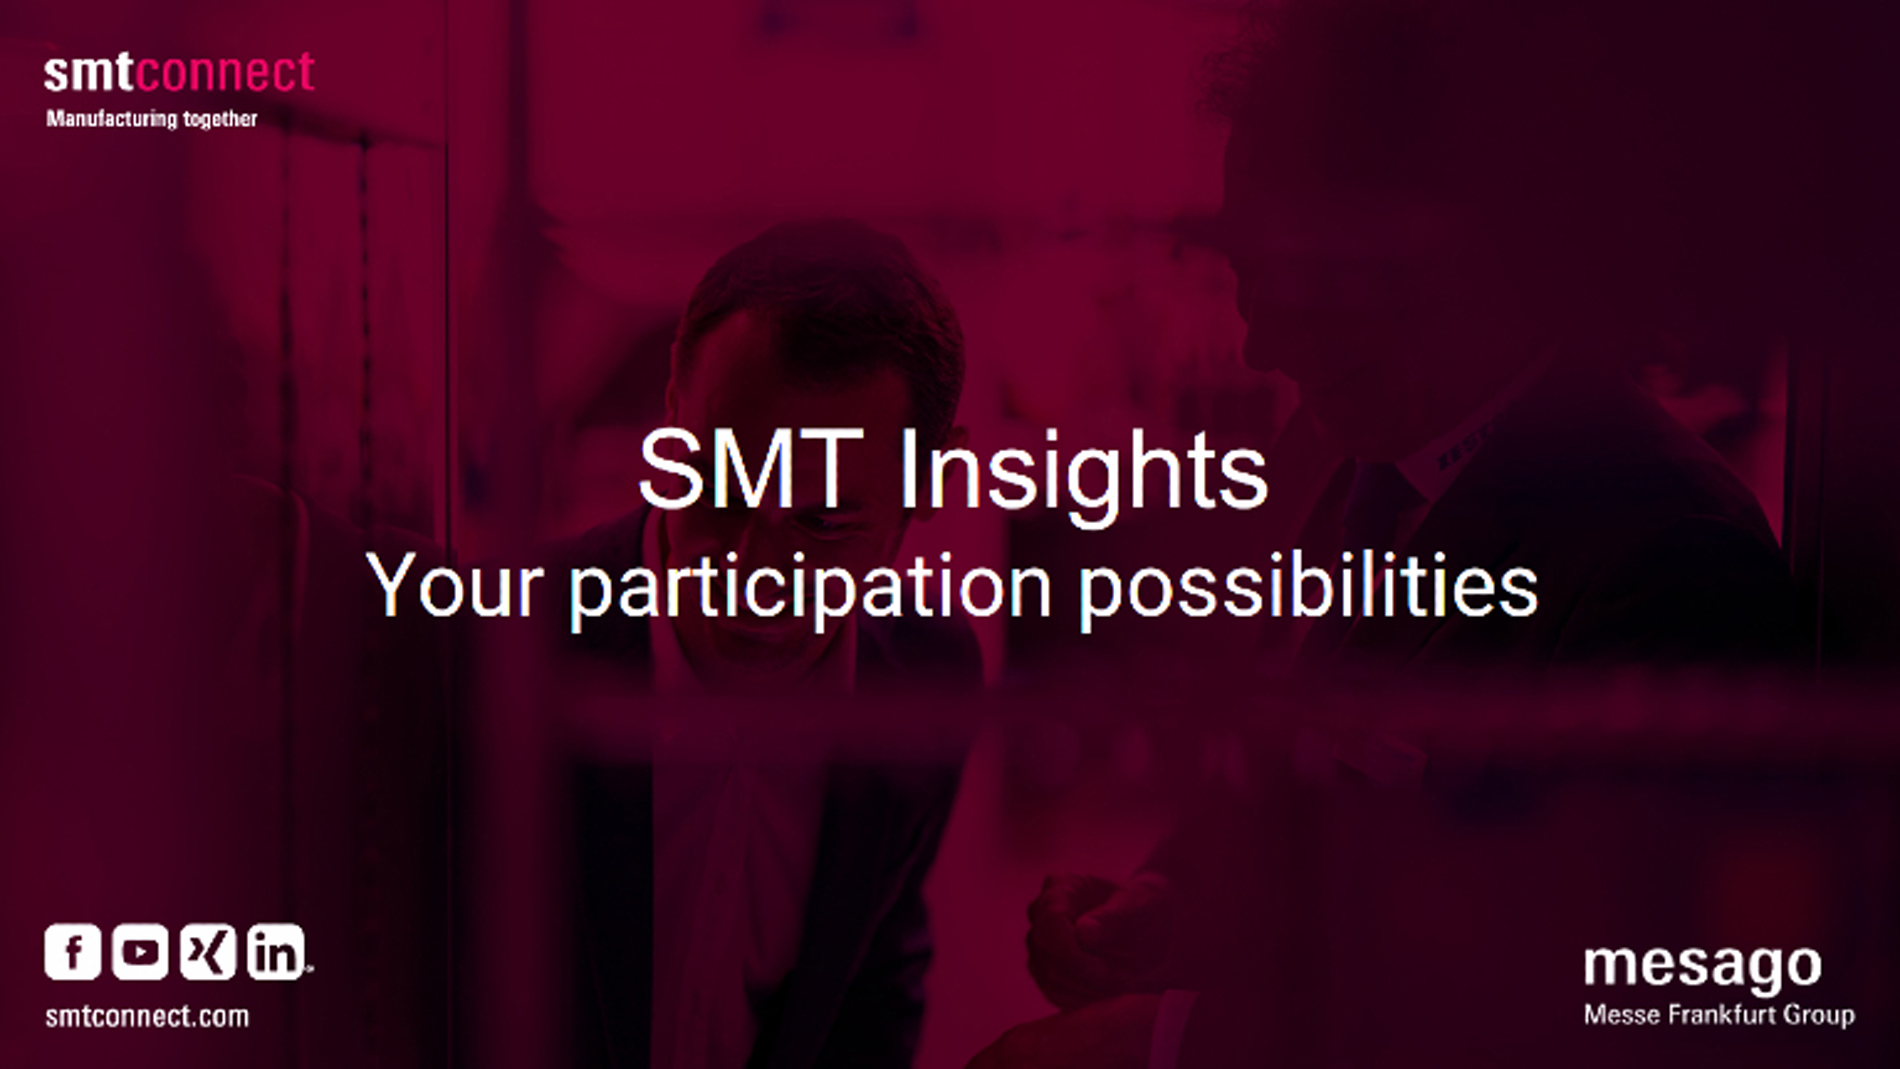 SMT Insights: Present yourself as a content driver in electronics manufacturing